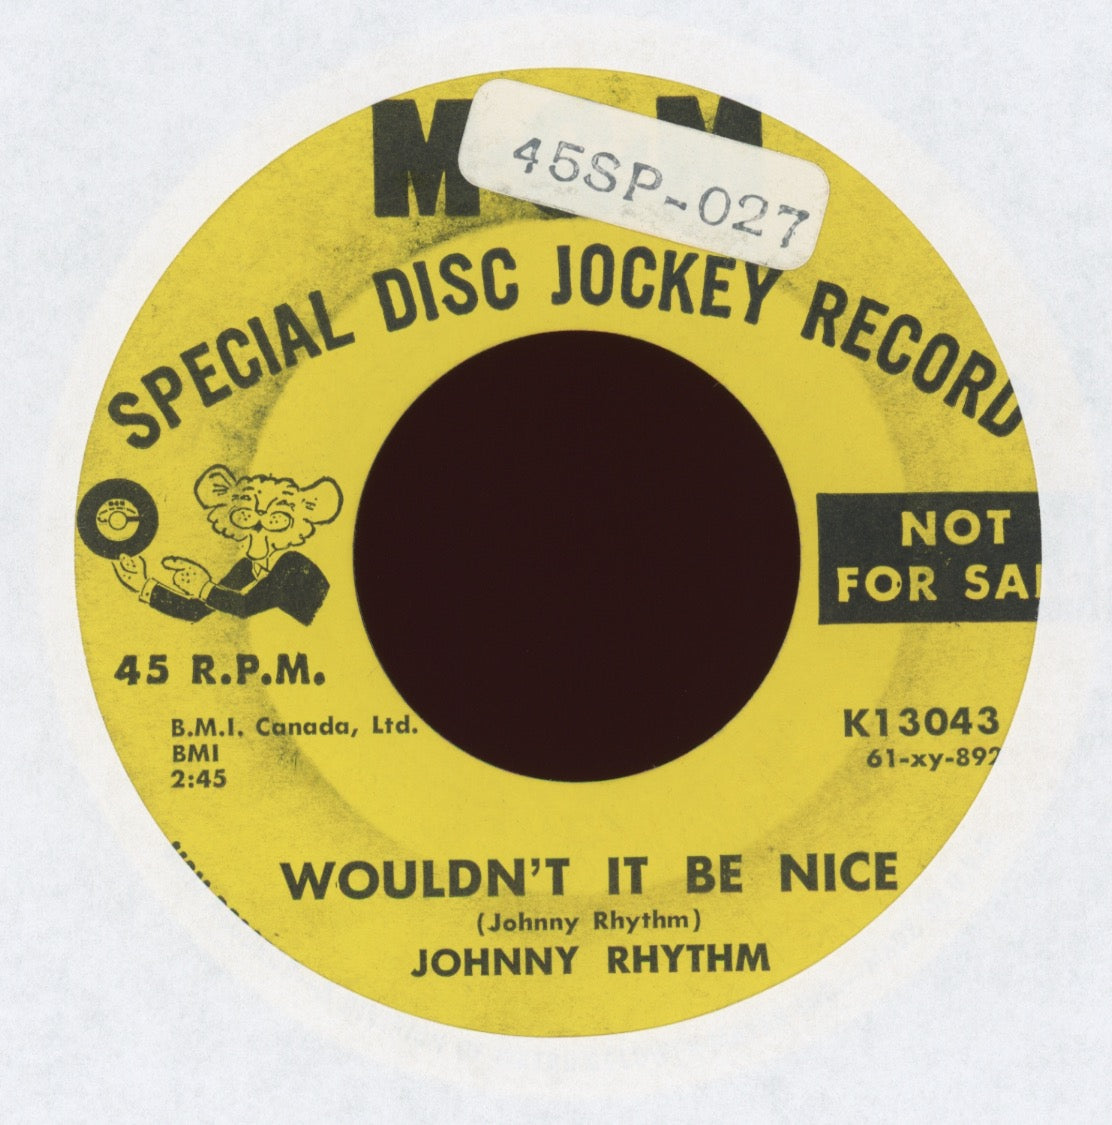 Johnny Rhythm - Wouldn't It Be Nice on MGM Promo